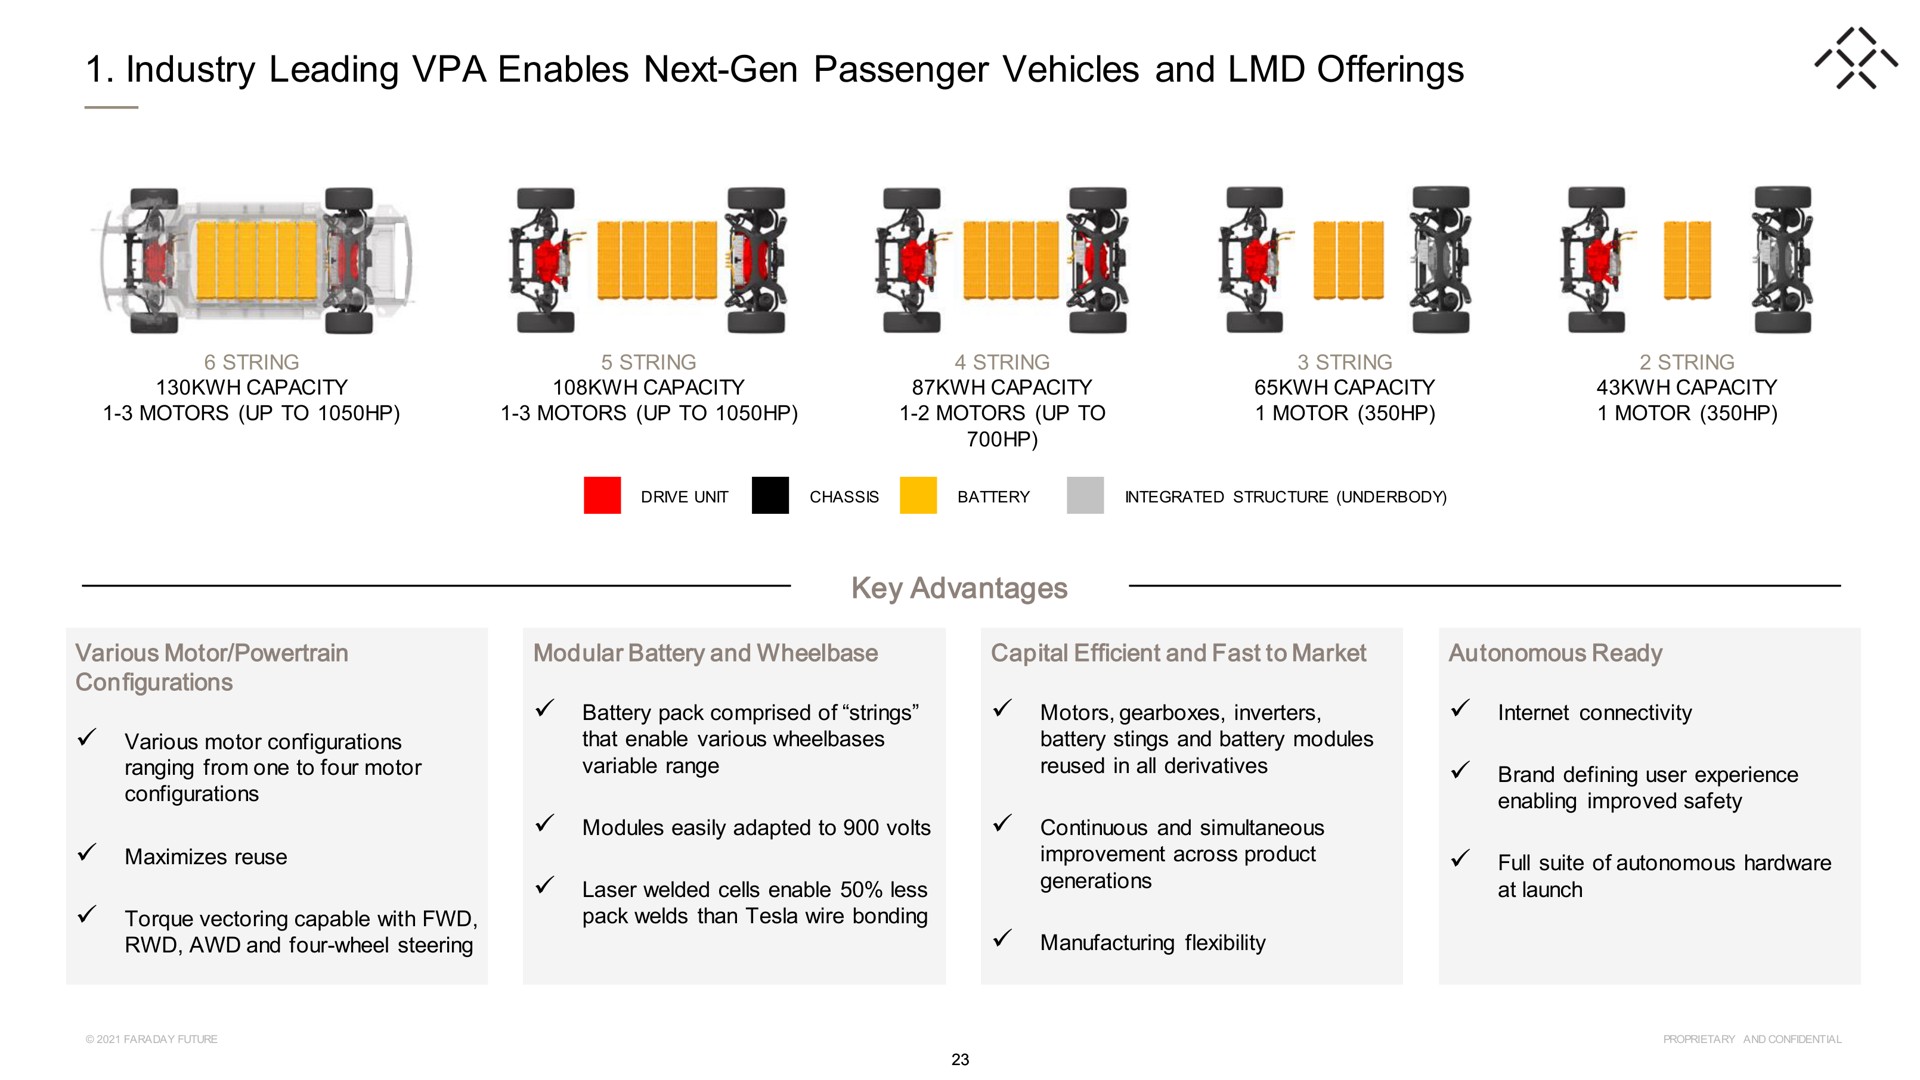 industry leading enables next gen passenger vehicles and offerings key advantages | Faraday Future